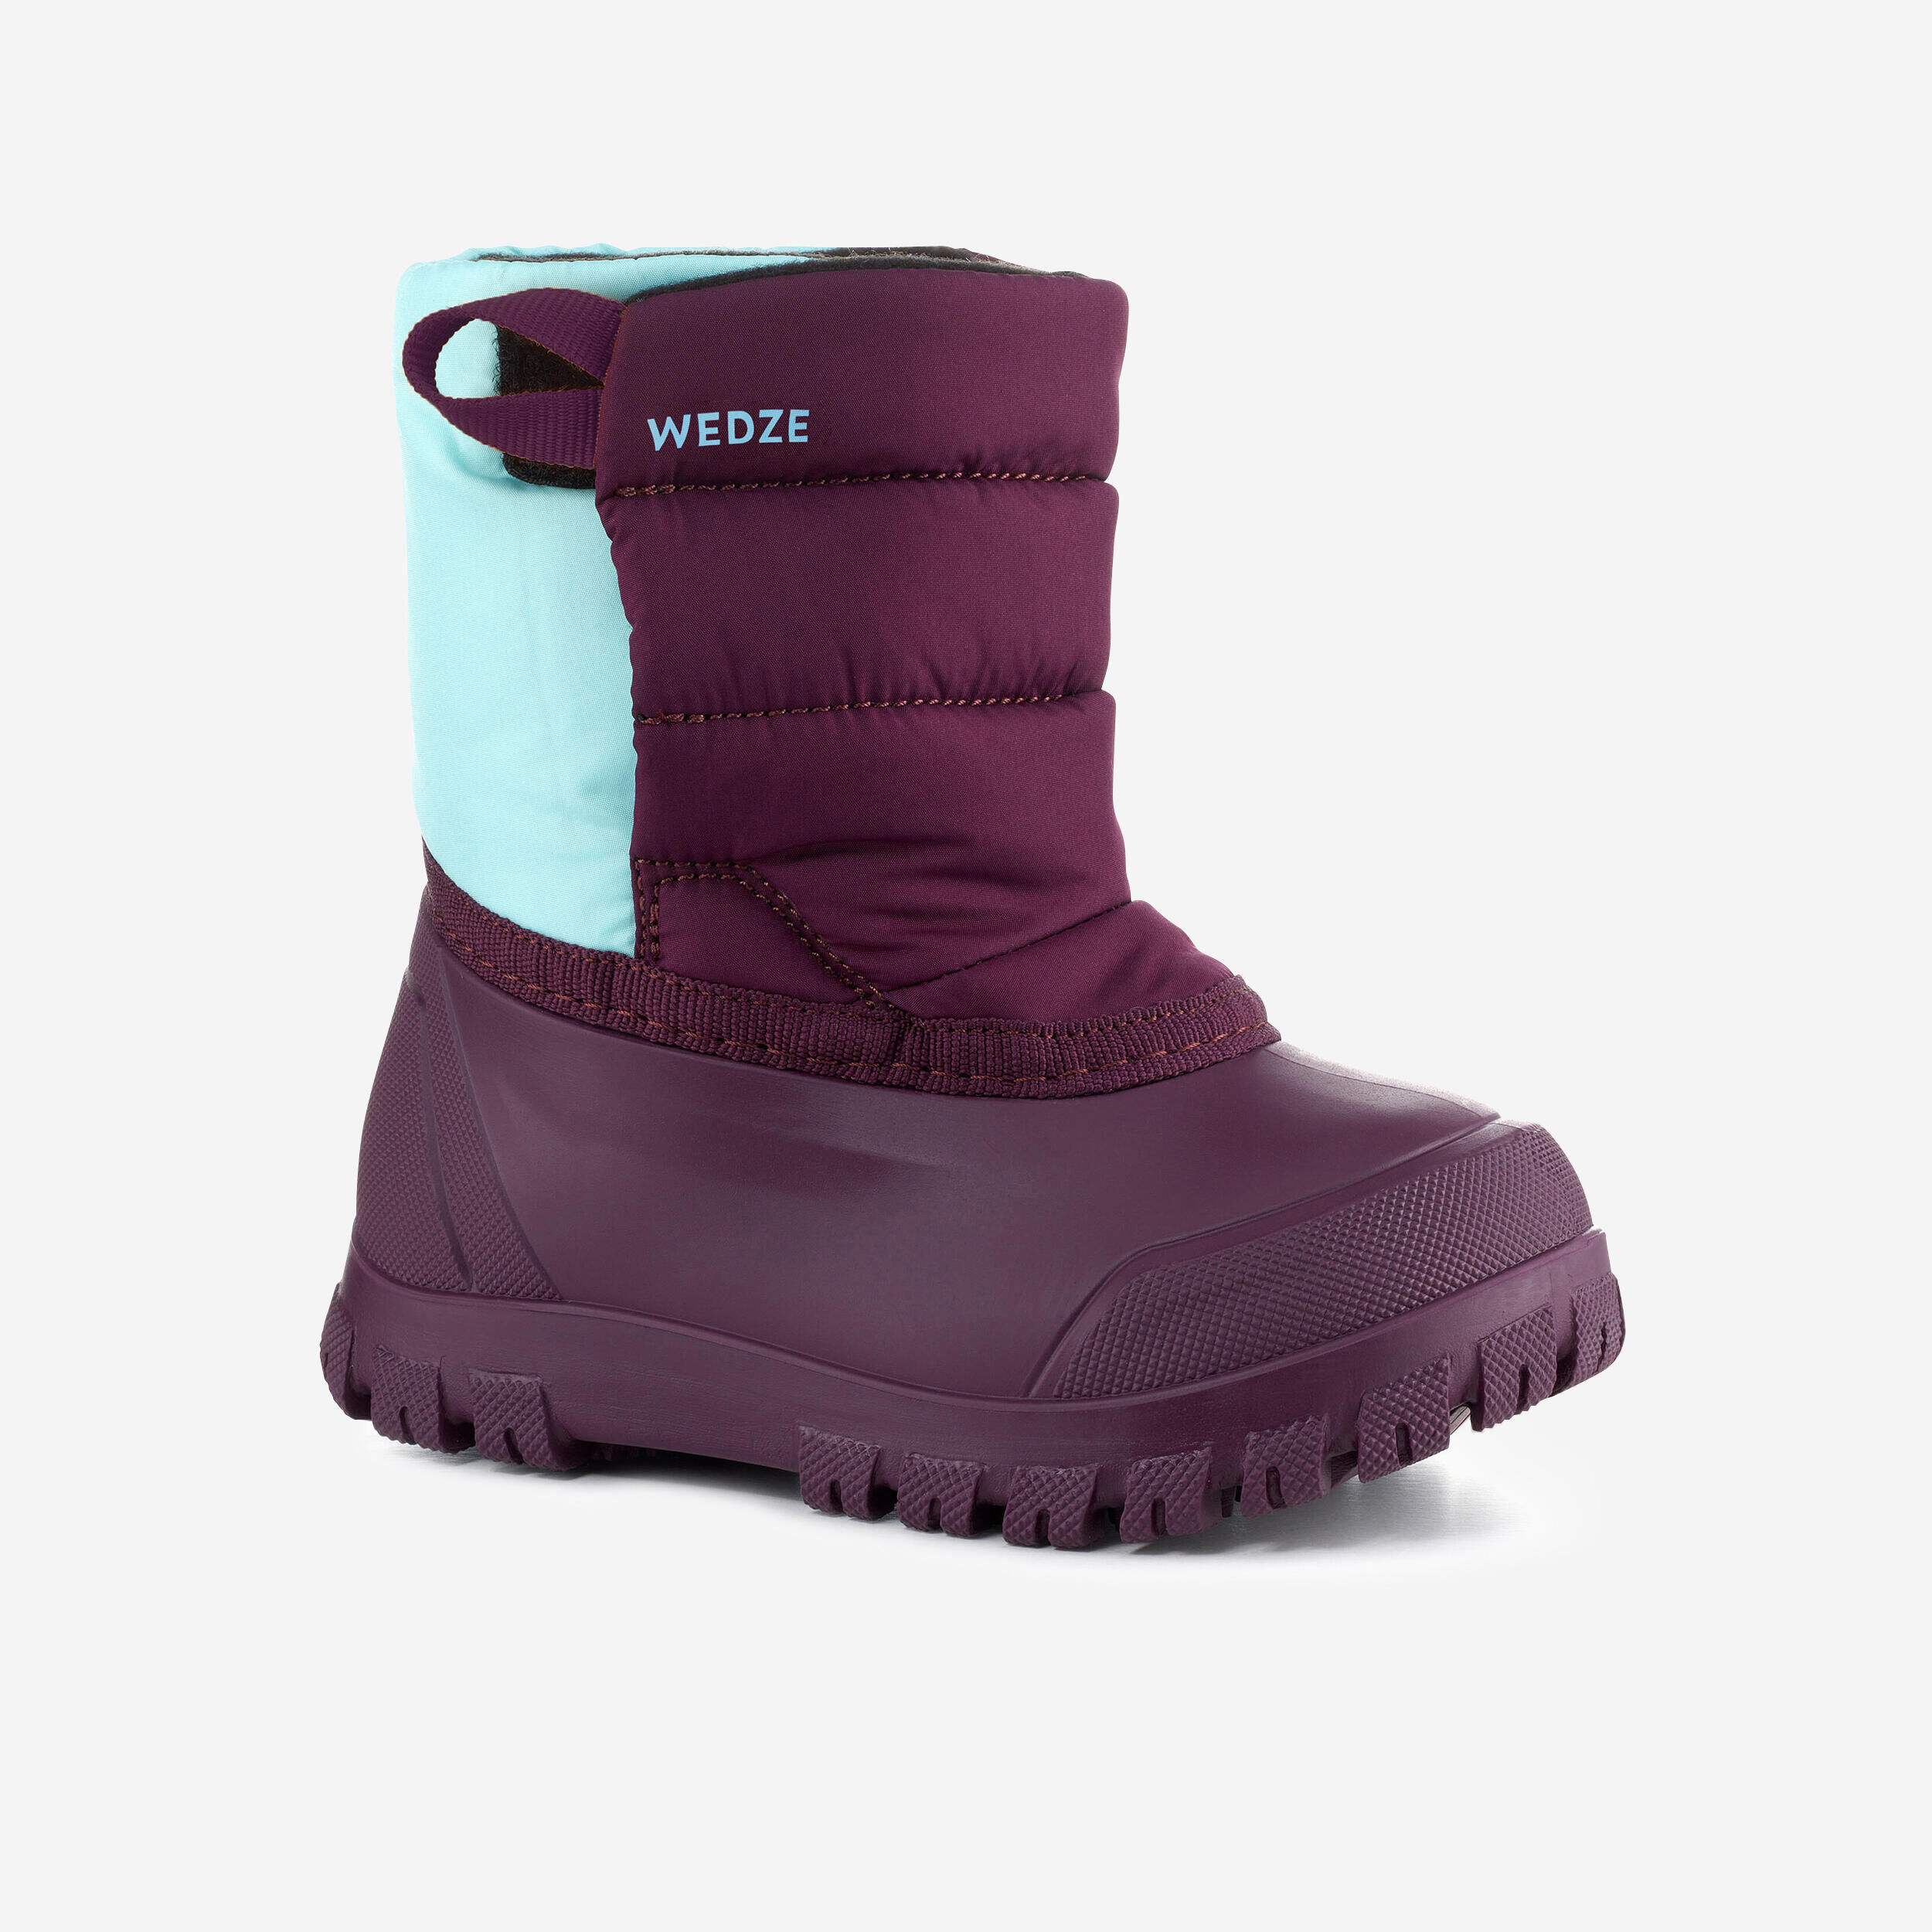 WEDZE Baby Snow Boots, Baby Après-Ski WARM Purple and Turquoise